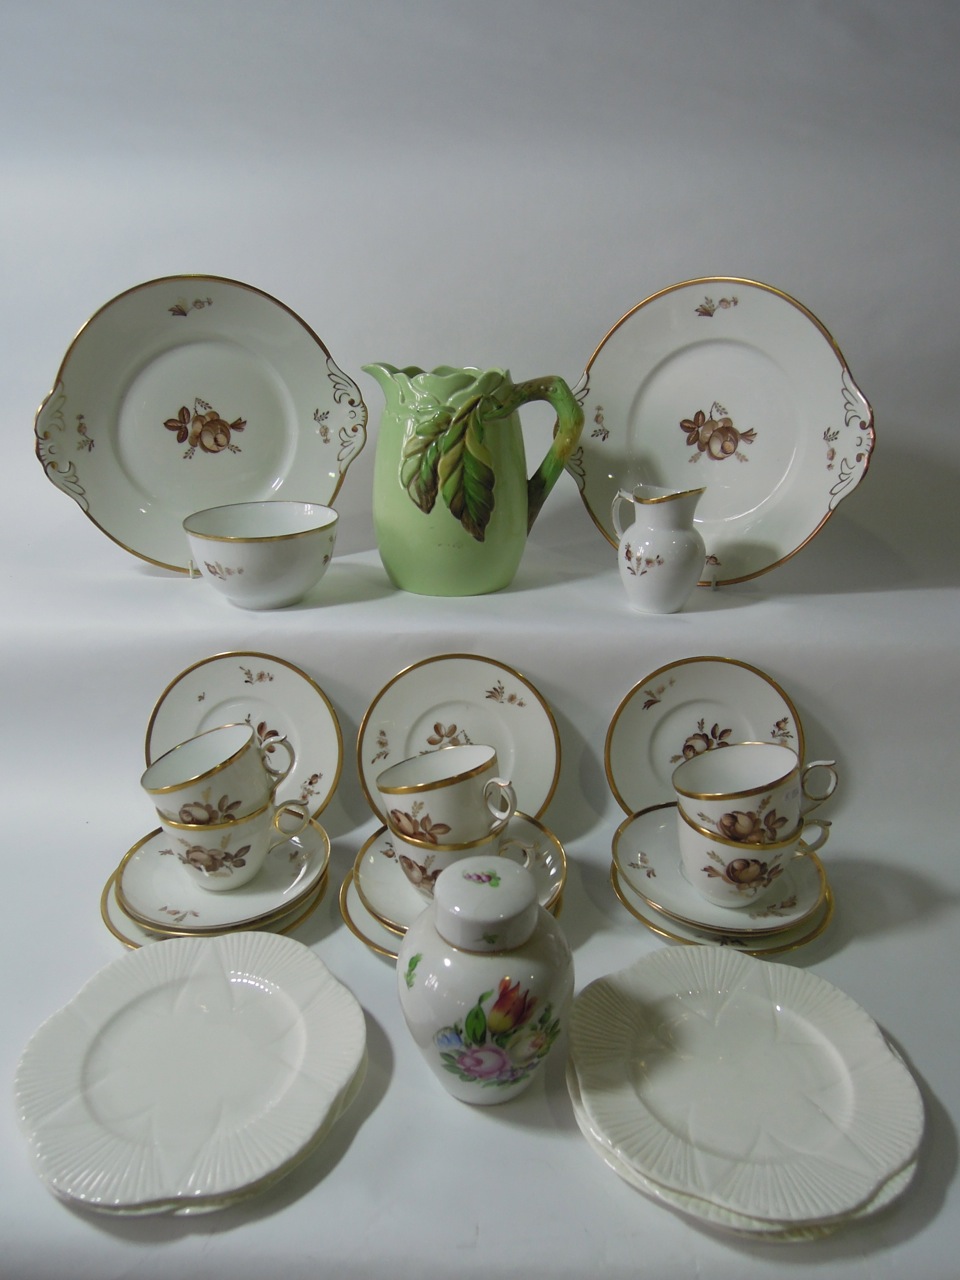 A part Royal Copenhagen tea set 688-9070 decorated with brown floral sprays and gilded rims